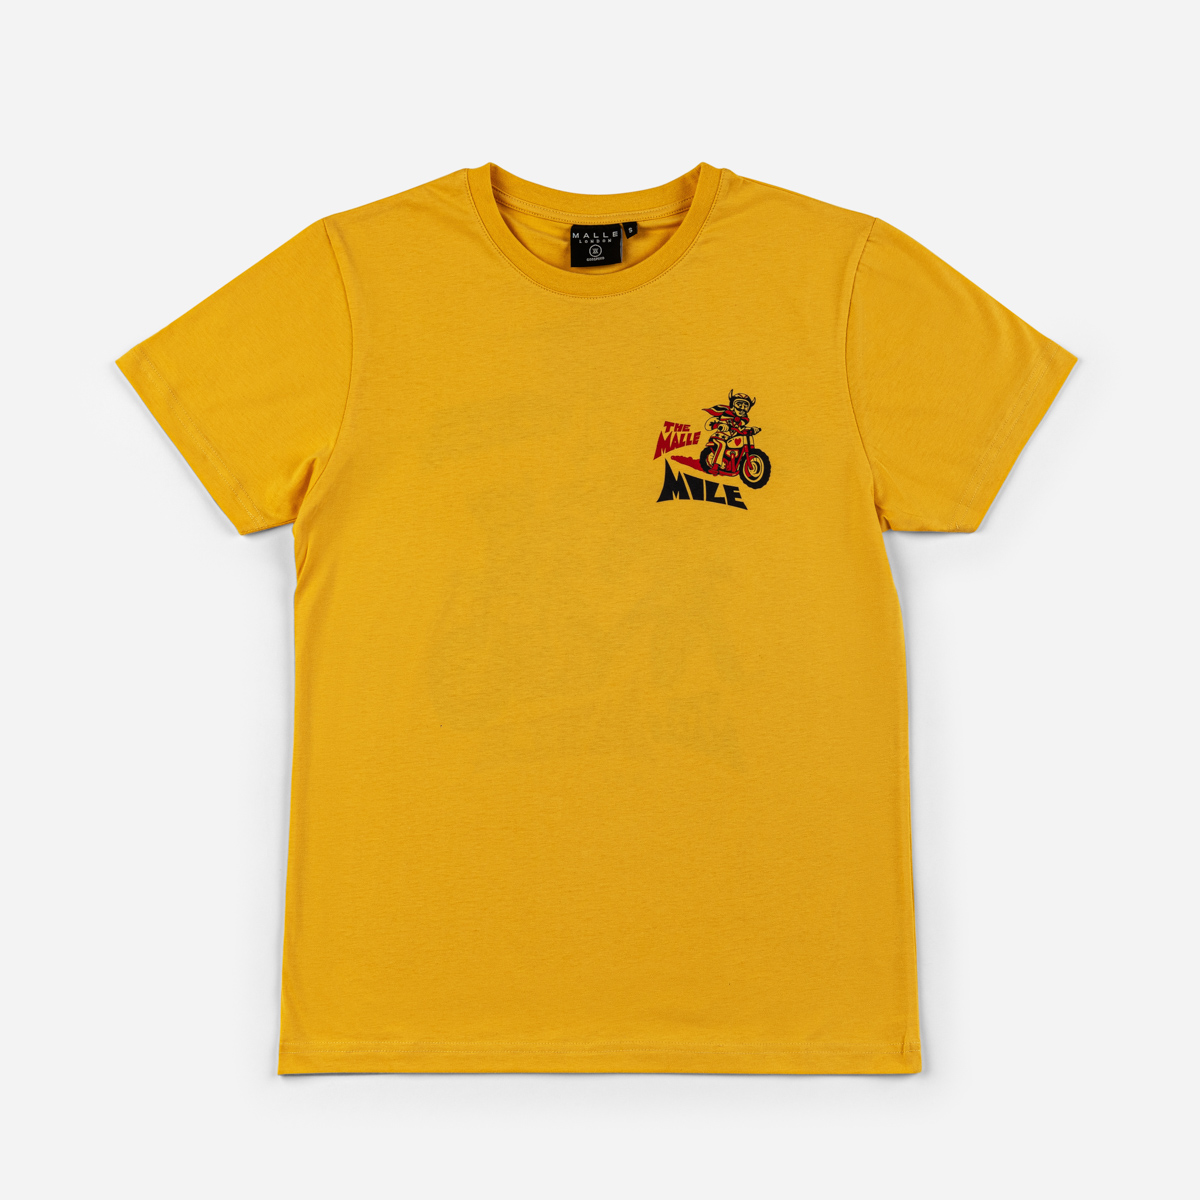 The Malle Mile Race Yellow T-Shirt - Malle London